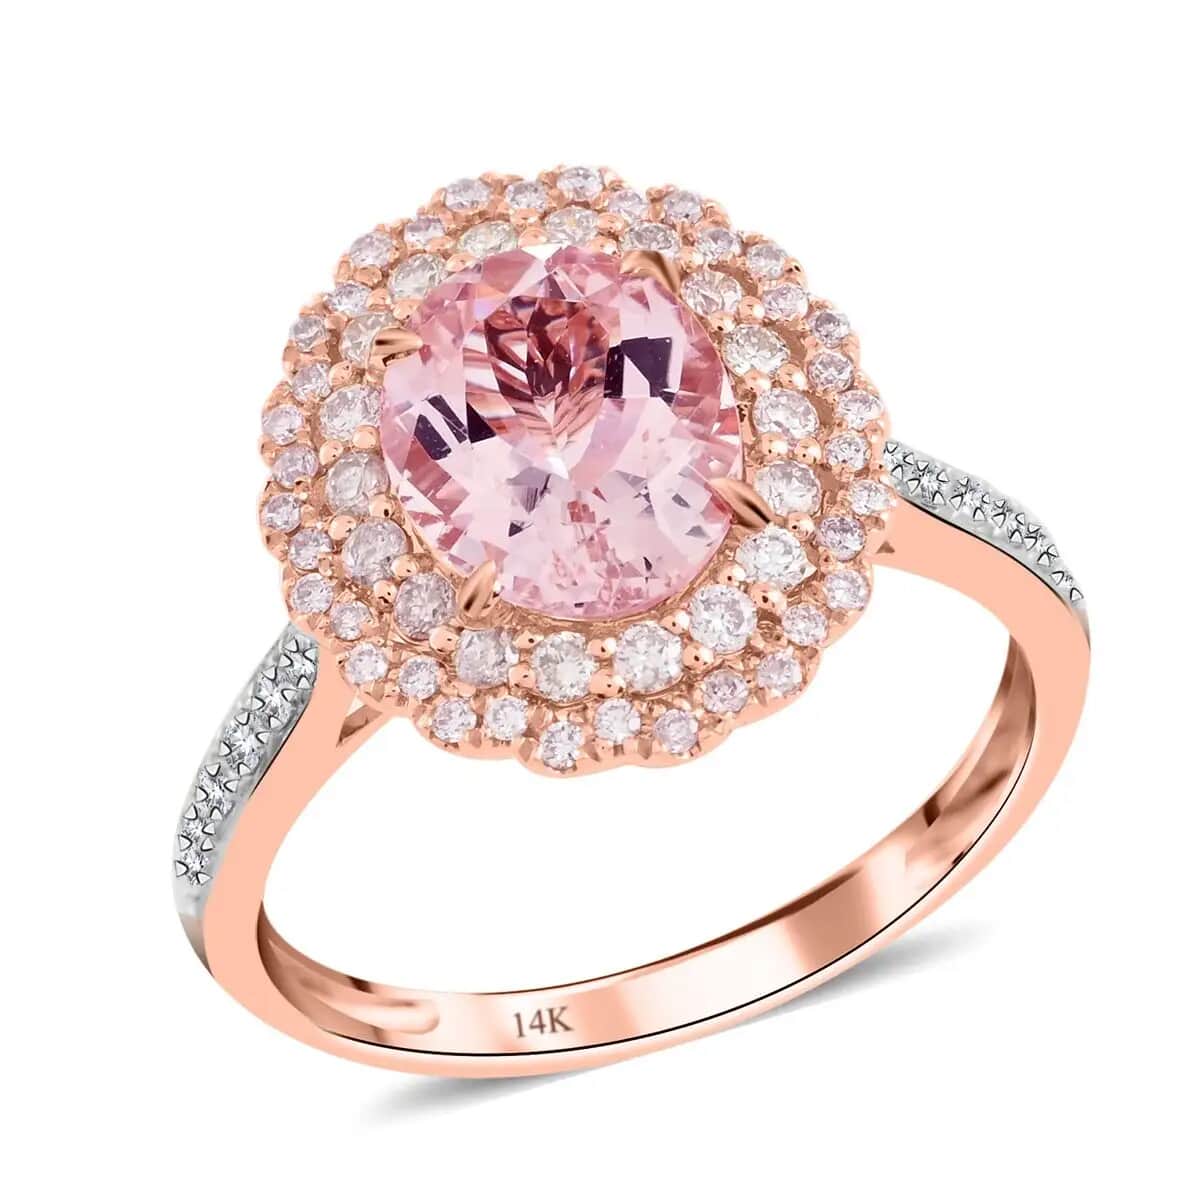 Ankur Treasure Chest Modani Marropino Morganite Ring, 14K Rose Gold Ring, Diamond Floral Halo Ring, Natural Pink And White Diamond Accent Ring, Promise Rings 1.95 ctw (Size 7.0) image number 0